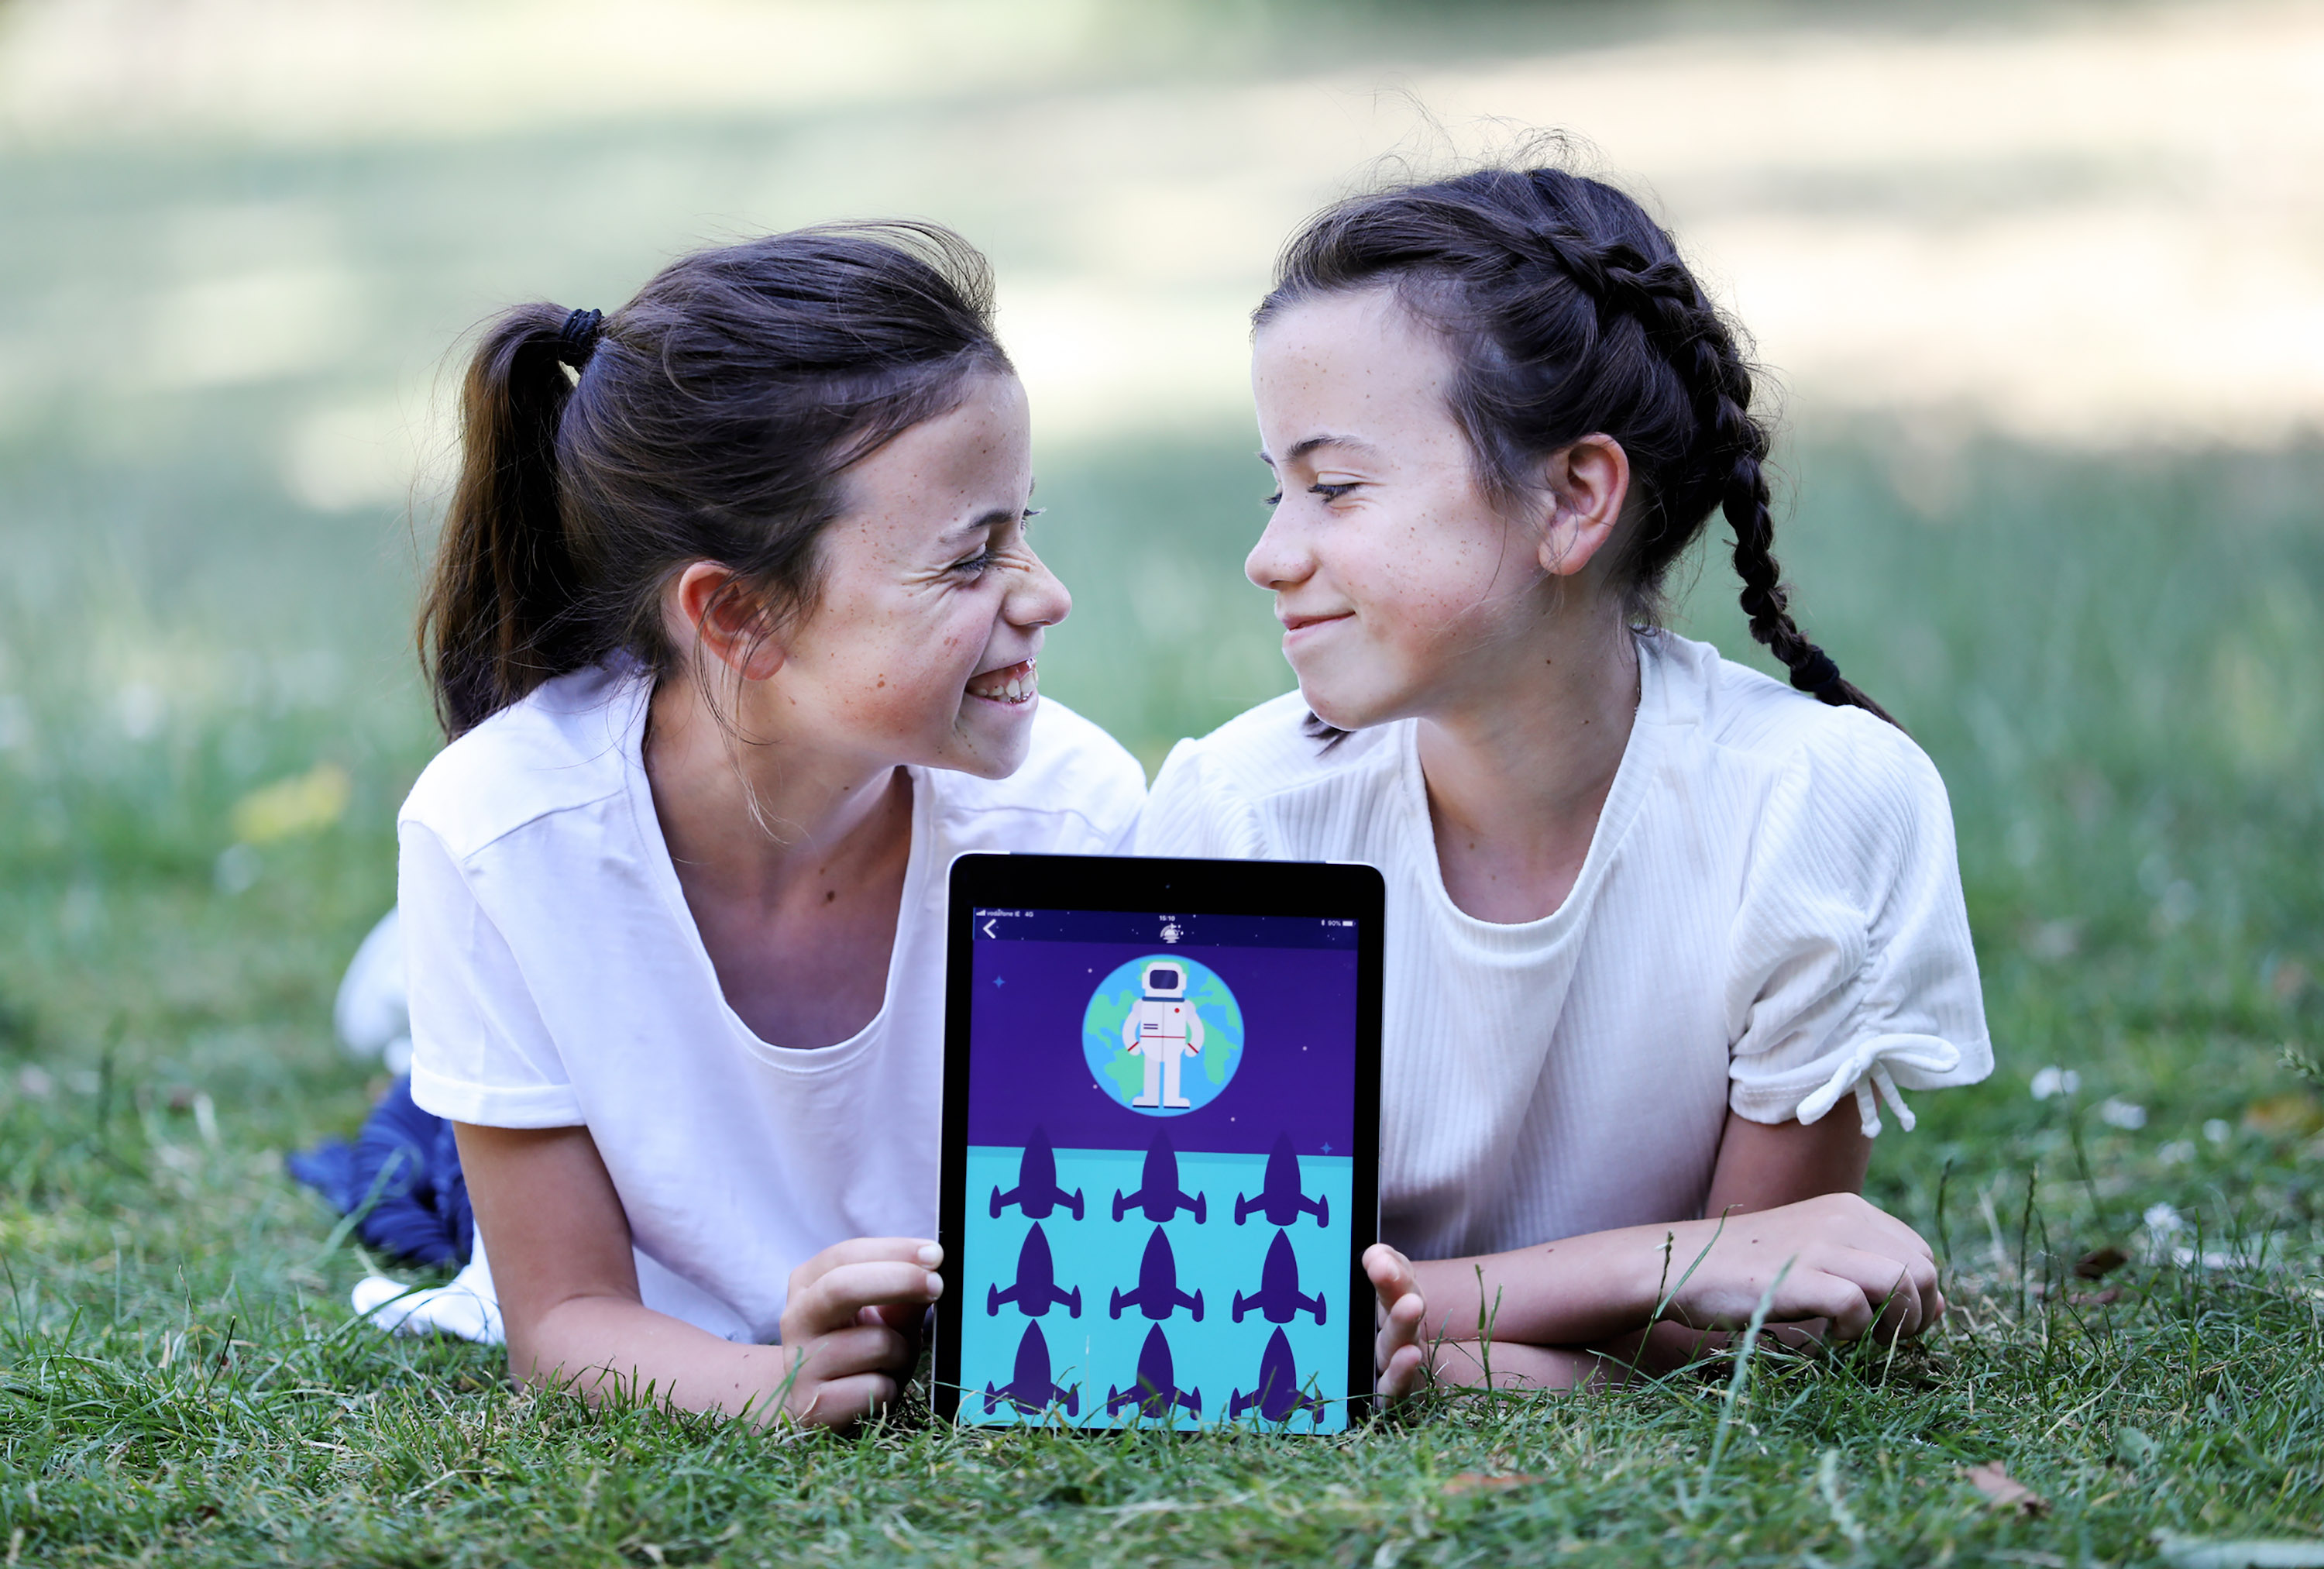 Dublin tech company launches new dyspraxia therapy app for children